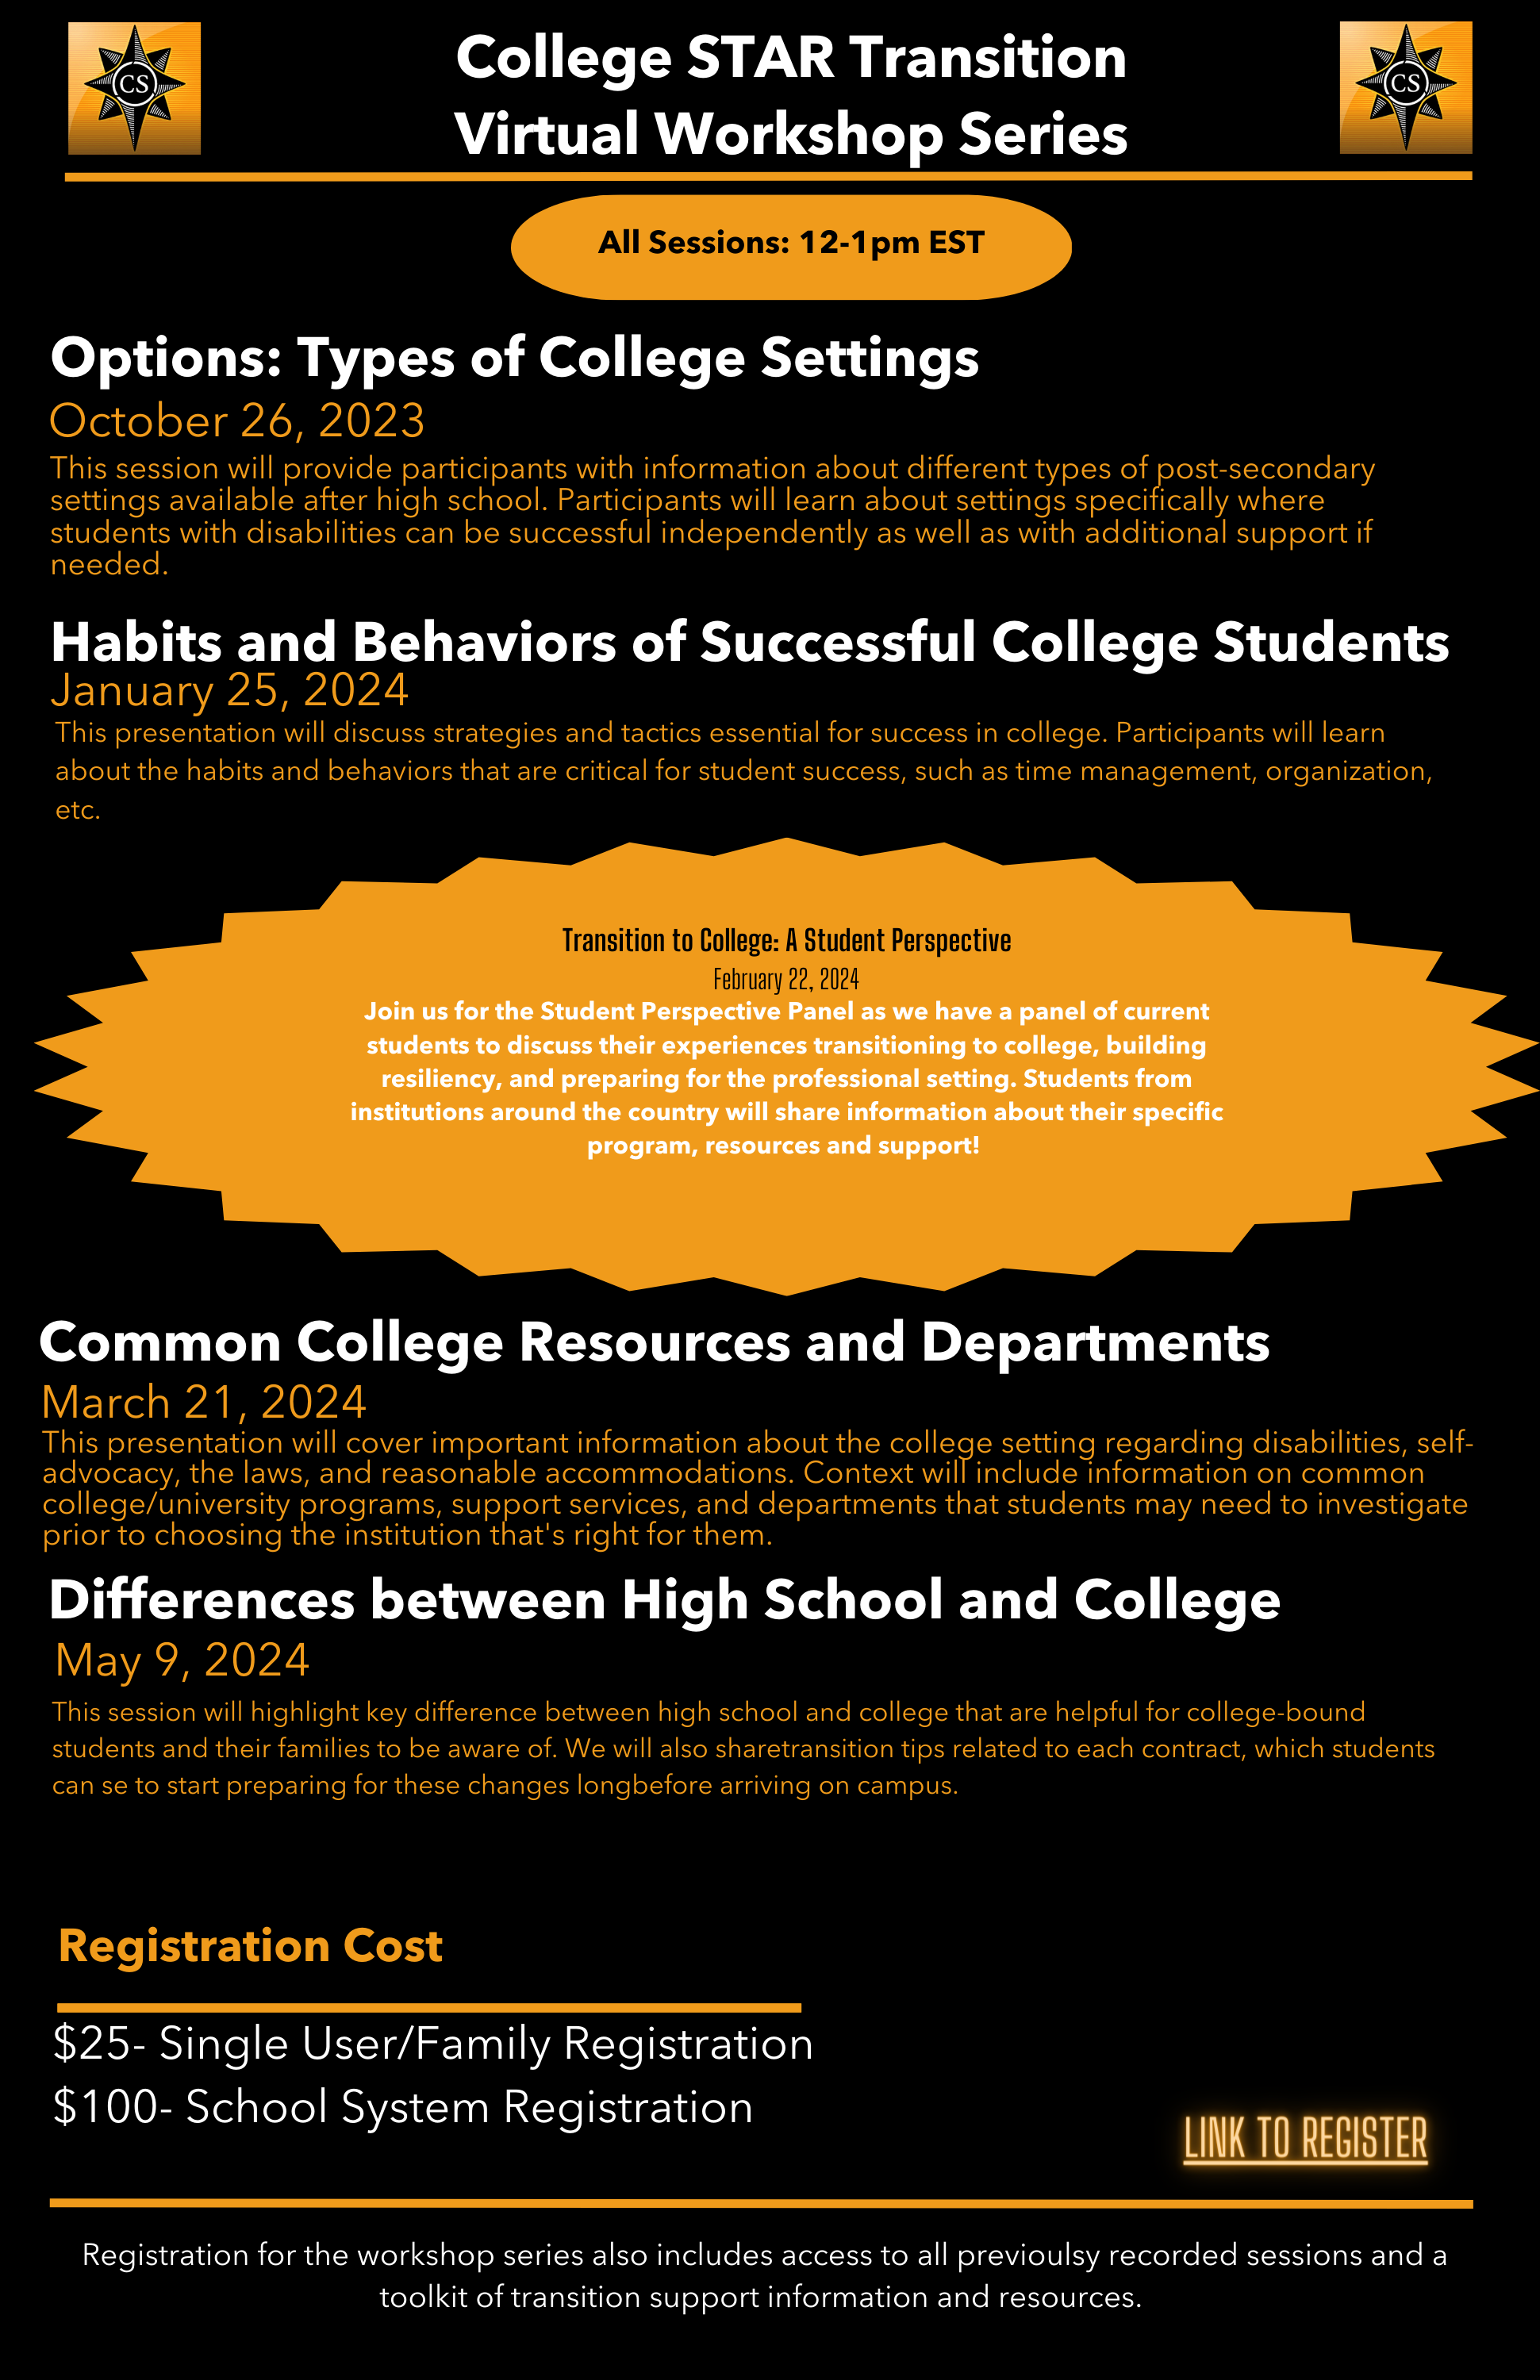 College STAR Transition

Virtual Workshop Series

All Sessions: 12-1 pm EST

Options: Types of College Settings

October 26, 2023

This session will provide participants with information about different types of post-secondary settings available after high school. Participants will learn about settings specifically where students with disabilities can be successful independently as well as with additional support if needed

Habits and Behaviors of Successful College Students

January 25, 2024

This presentation will discuss strategies and tactics essential for success in college. Participants will learn about the habits and behaviors that are critical for student success, such as time management, organization, etc.

Transition to College: A Student Perspective

February 22, 2024

Join us for the Student Perspective Panel as we have a panel of current students to discuss their experiences transitioning to college, building resiliency, and preparing for the professional setting. Students from institutions around the country will share information about their specific program, resources and support!

Common College Resources and Departments

March 21, 2024

This presentation will cover important information about the college setting regarding disabilities, self-advocacy, the laws, and reasonable accommodations. Context will include information on common college/university programs, support services, and departments that students may need to investigate prior to choosing the institution that's right for them.

Differences between High School and College

May 9, 2024

This session will highlight key difference between high school and college that are helpful for college-bound students and their families to be aware of. We will also share transition tips related to each contract, which students can se to start preparing for these changes long before arriving on campus.

Registration Cost

$25- Single User/Family Registration

$100- School System Registration

LINK TO REGISTER

Registration for the workshop series also includes access to all previously recorded sessions and a toolkit of transition support information and resources.